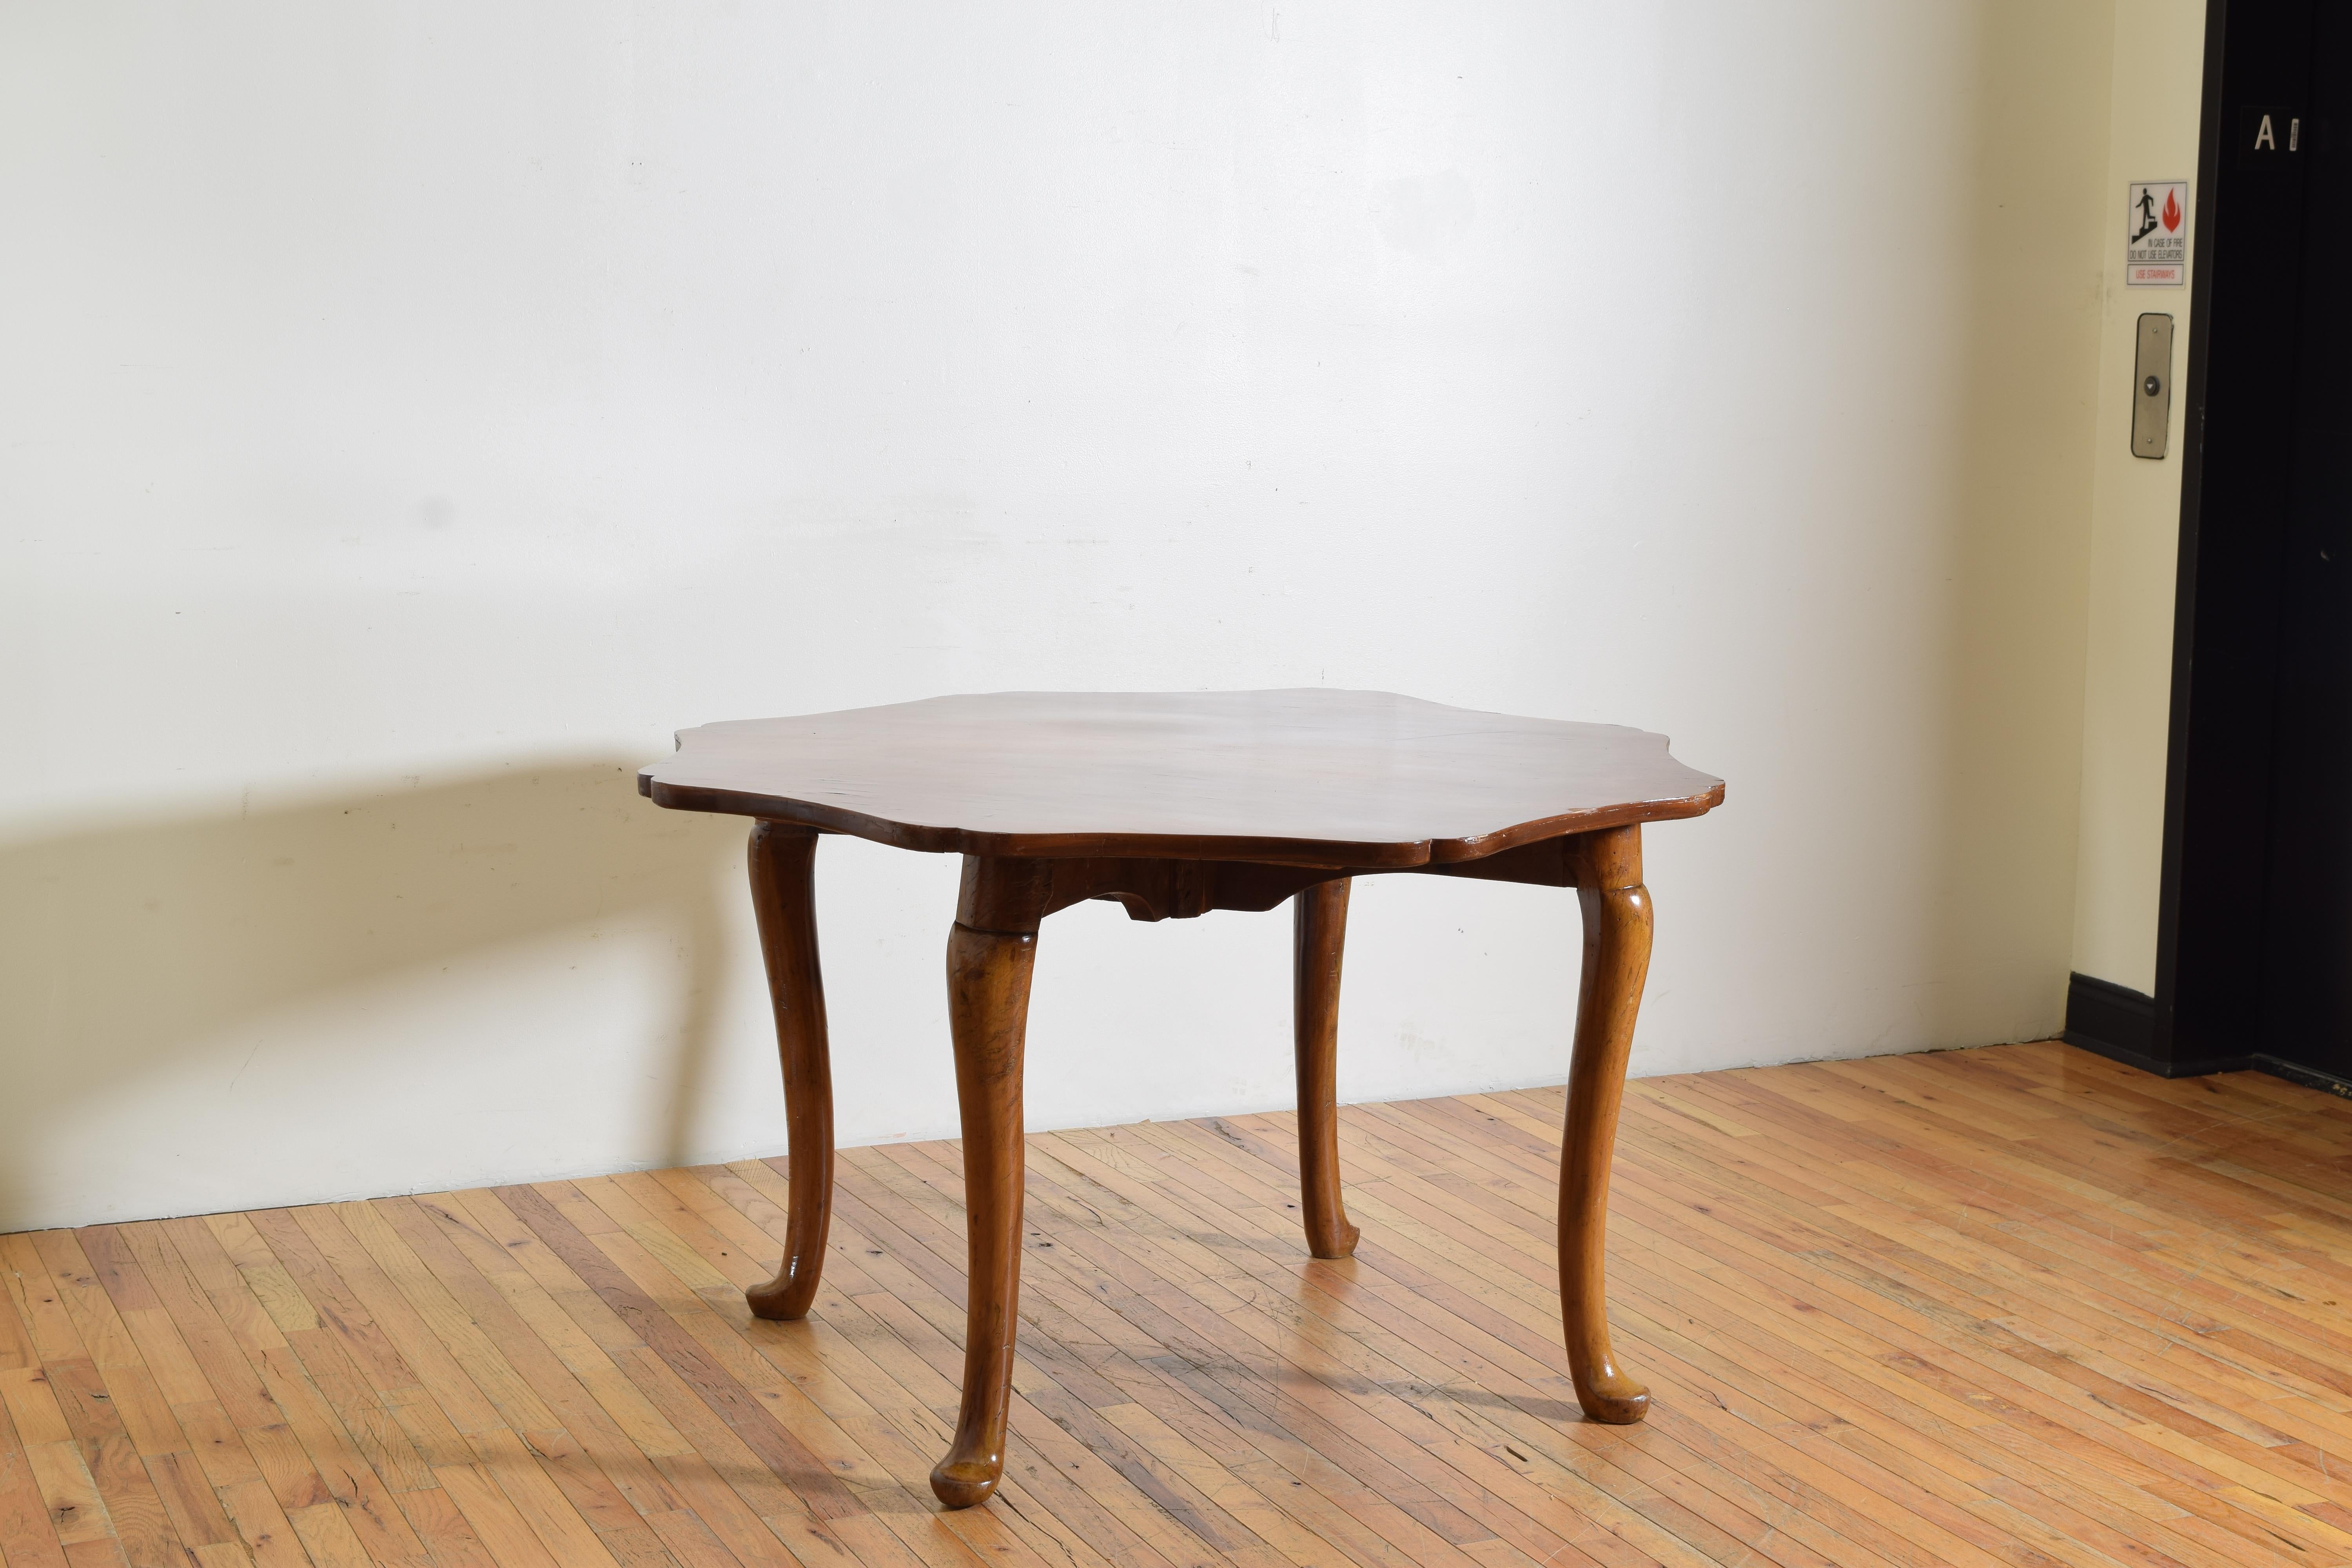 The top of octagonal shaped with curved corners and concave edges and covered in 4 equals; sections of walnut veneers, raised on a two piece solid walnut base featuring cabriole legs and pad shaped feet